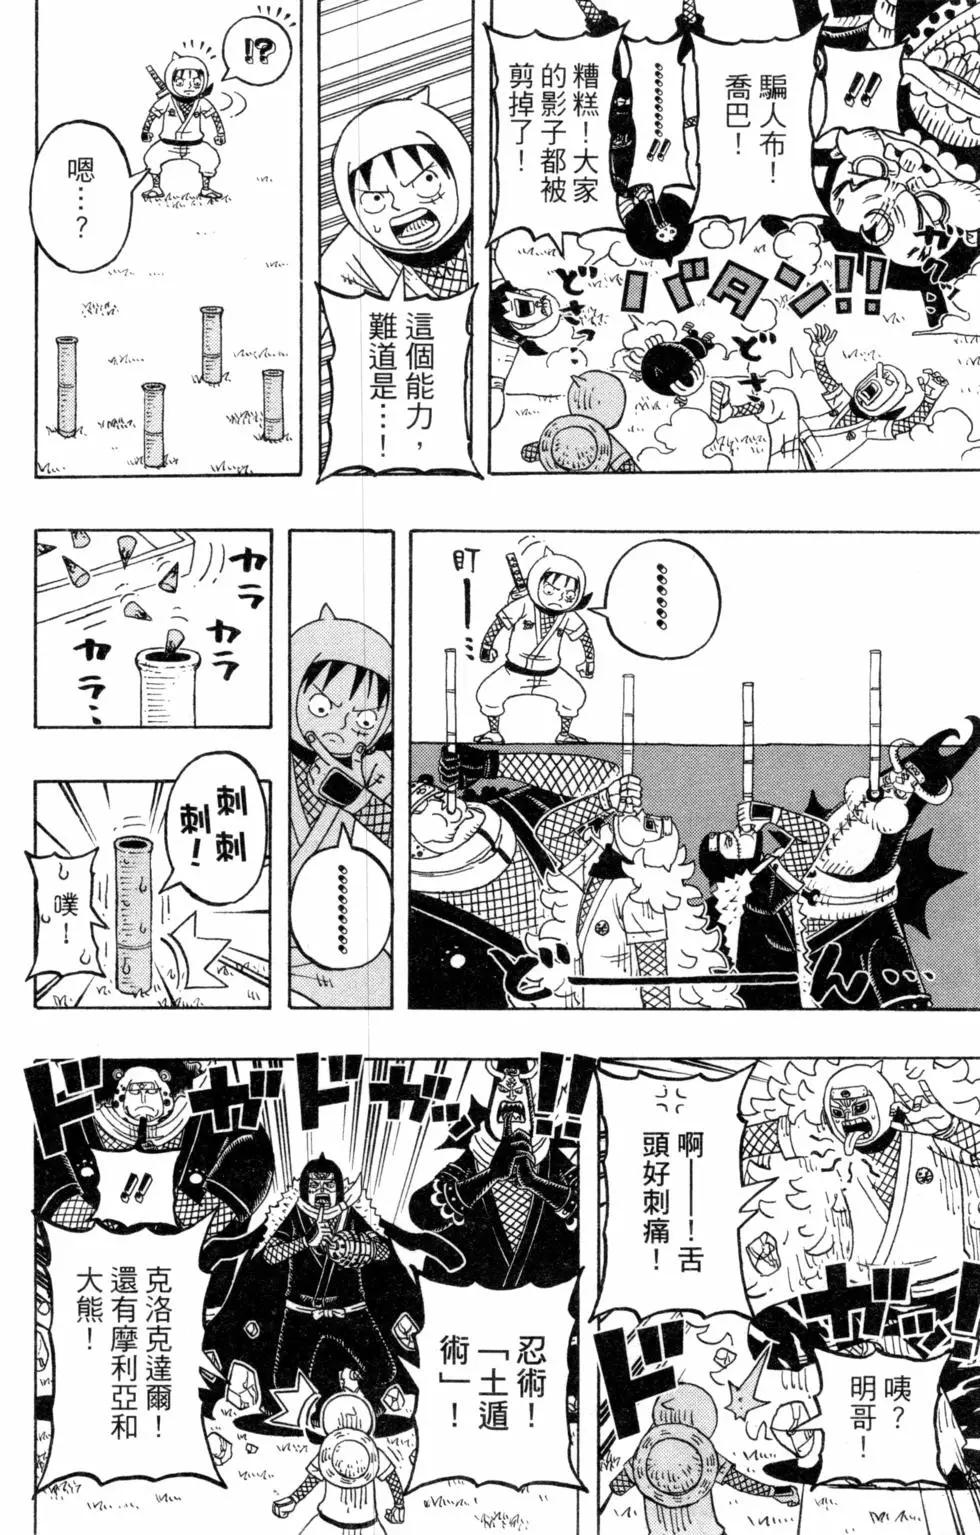 One piece party - 第06卷(1/4) - 3